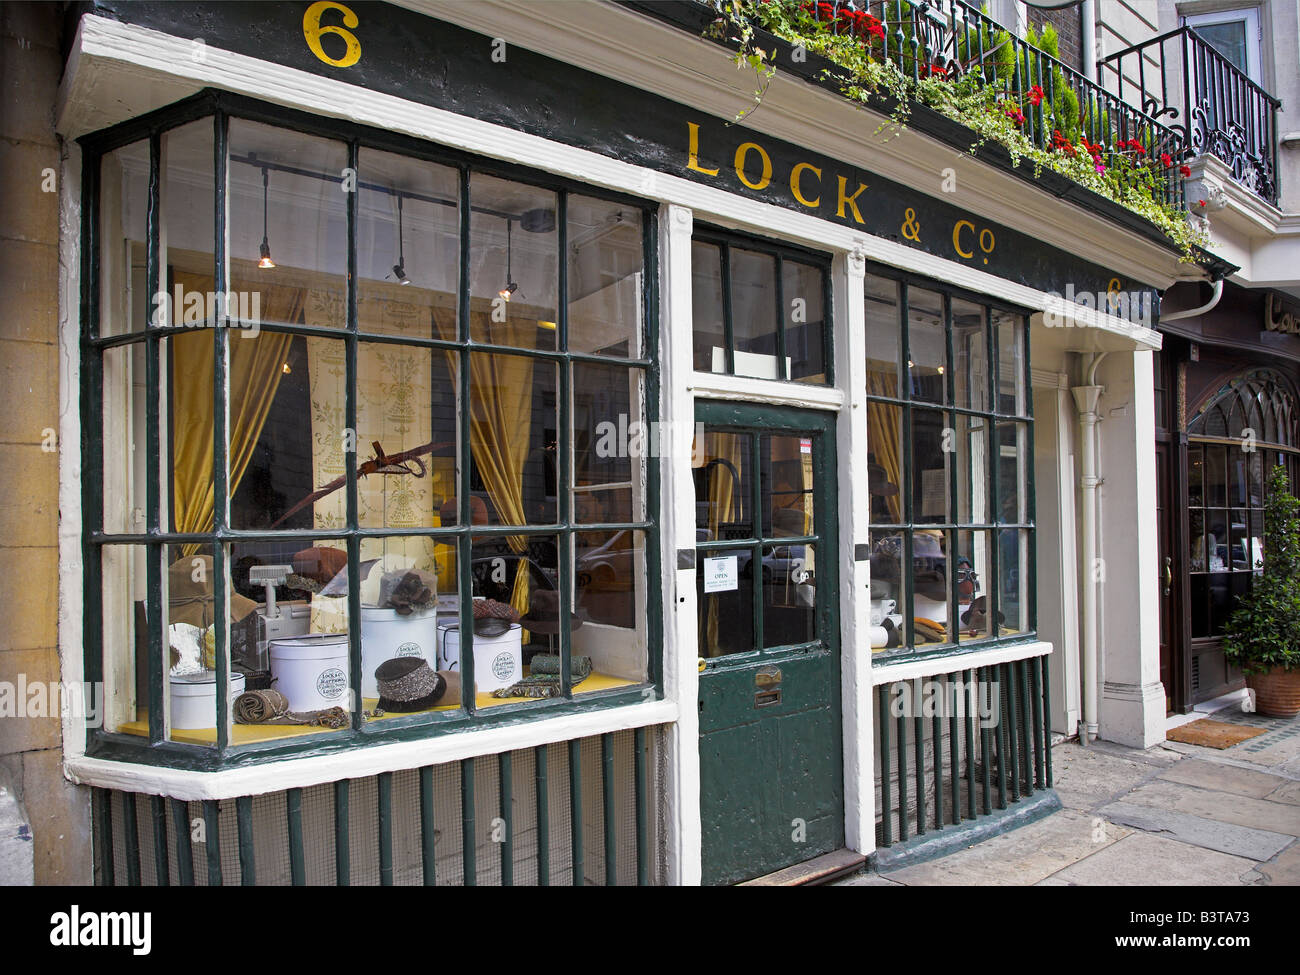 England, London, The premesis James Lock & Co, a traditional hat makers in St James. Stock Photo